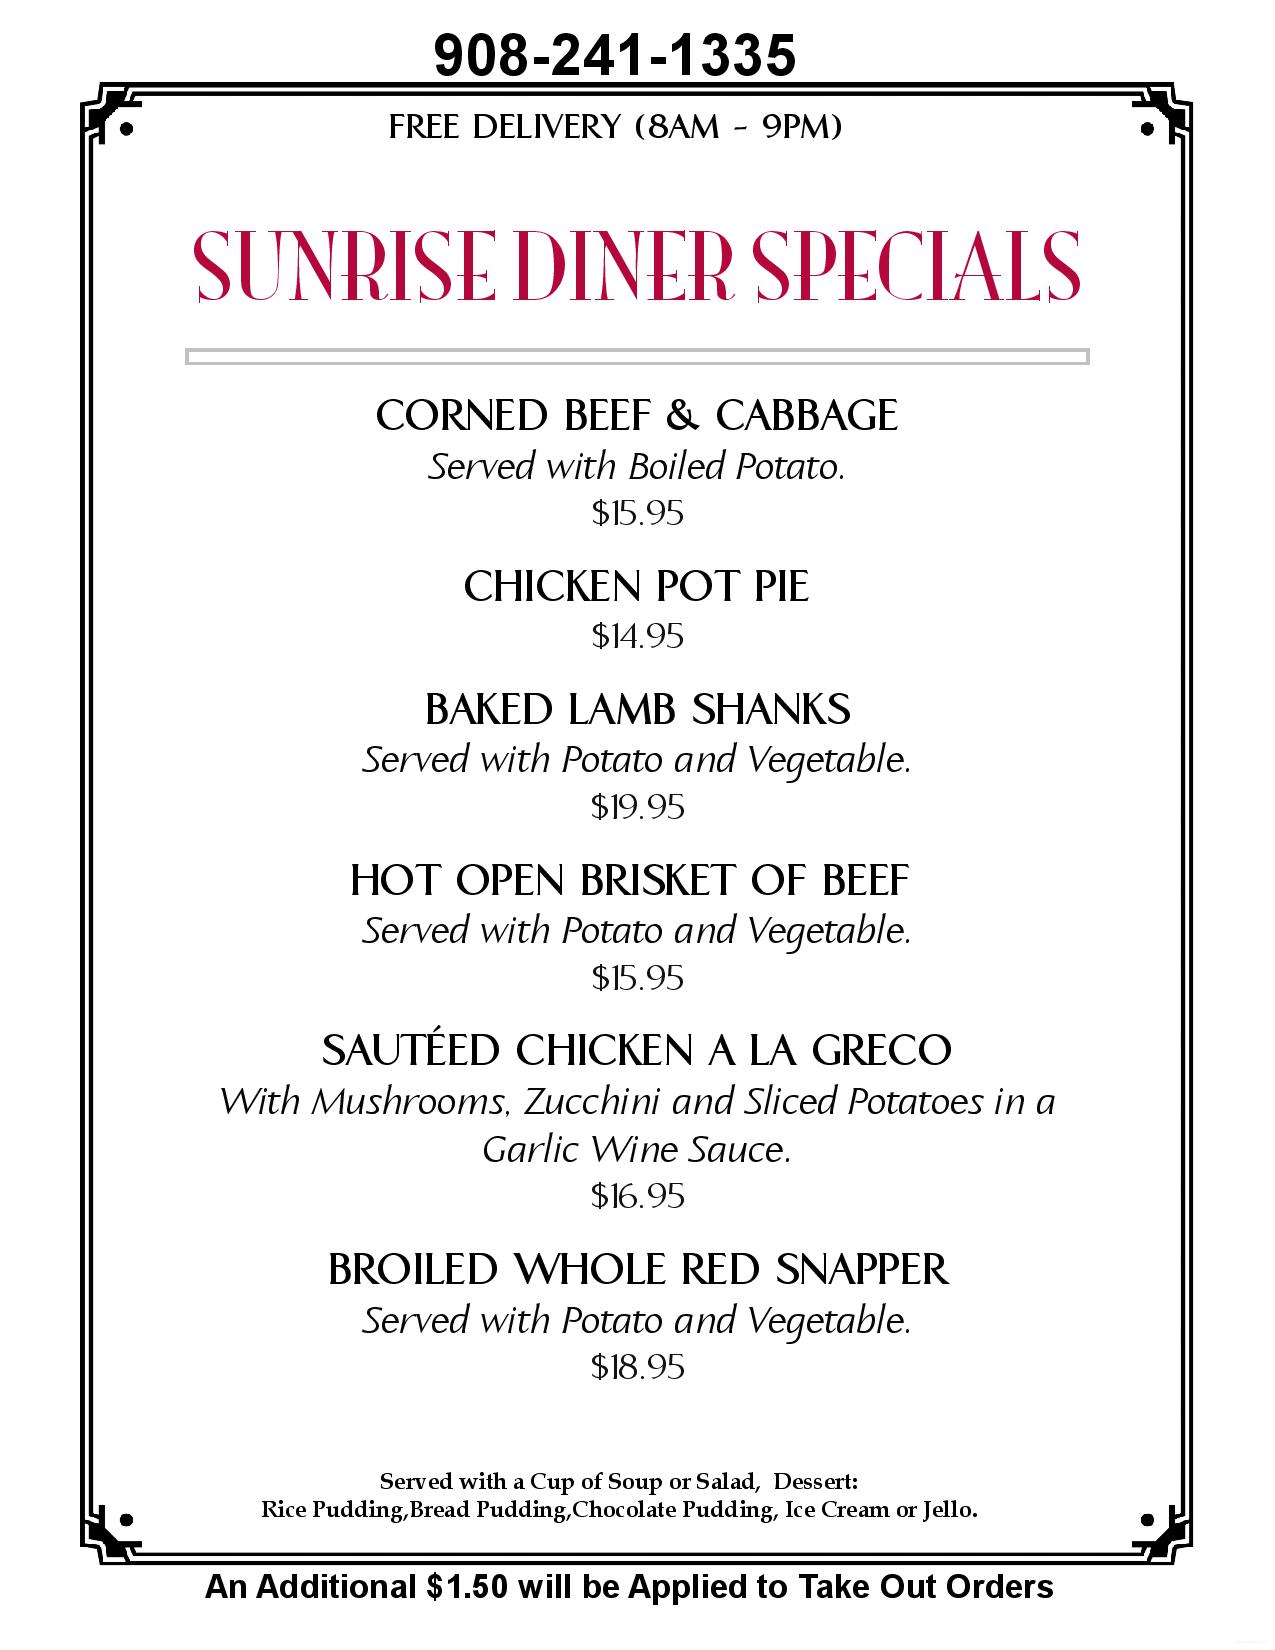 Daily Specials - Sunrise Diner